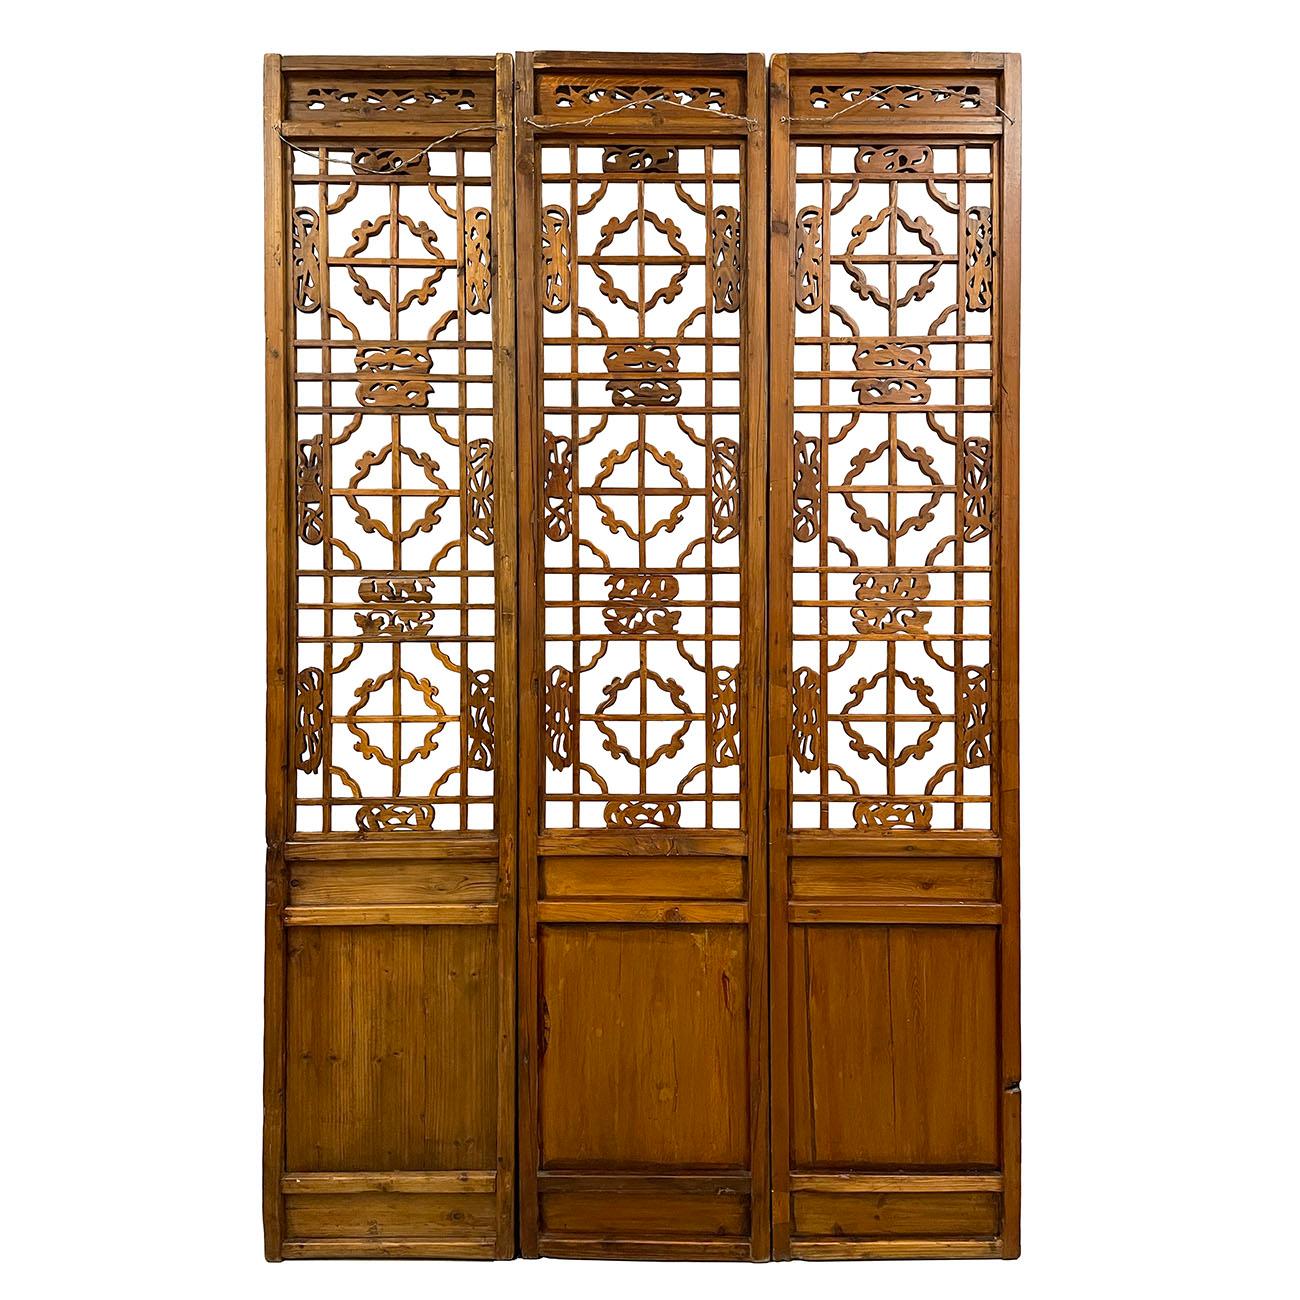 Late 19th Century Antique Chinese Handcrafted 3 Panel Wooden Screen/Room Divider For Sale 6